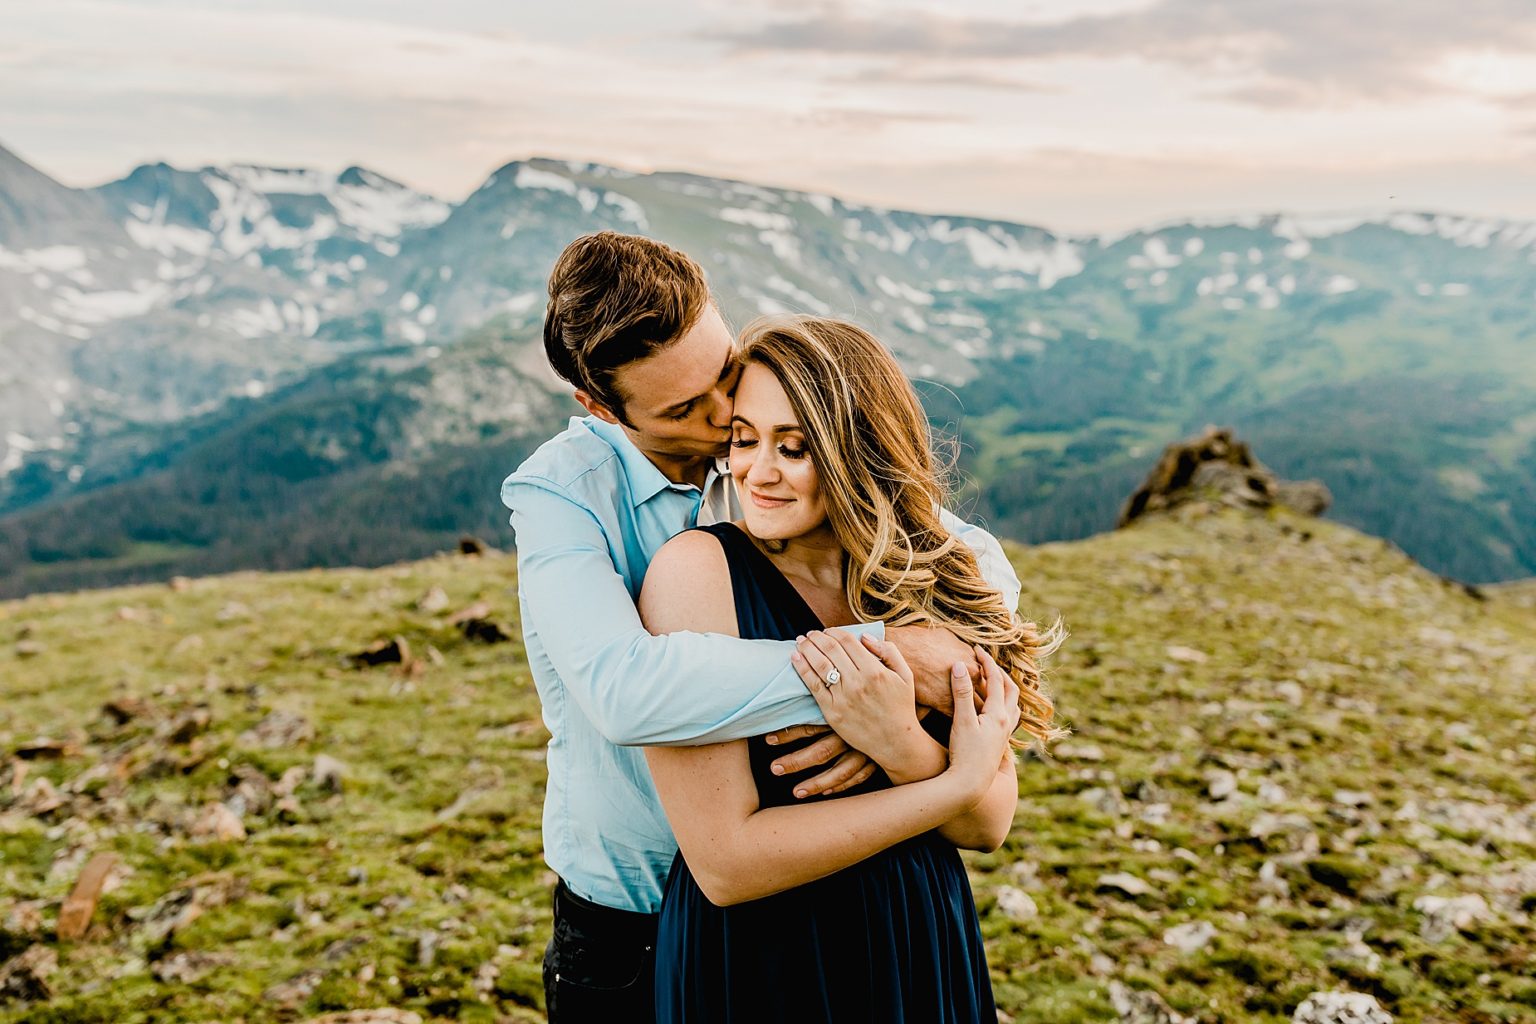 man gives woman a hug and kiss with majestic rocky mountain and green grass scenery in the background